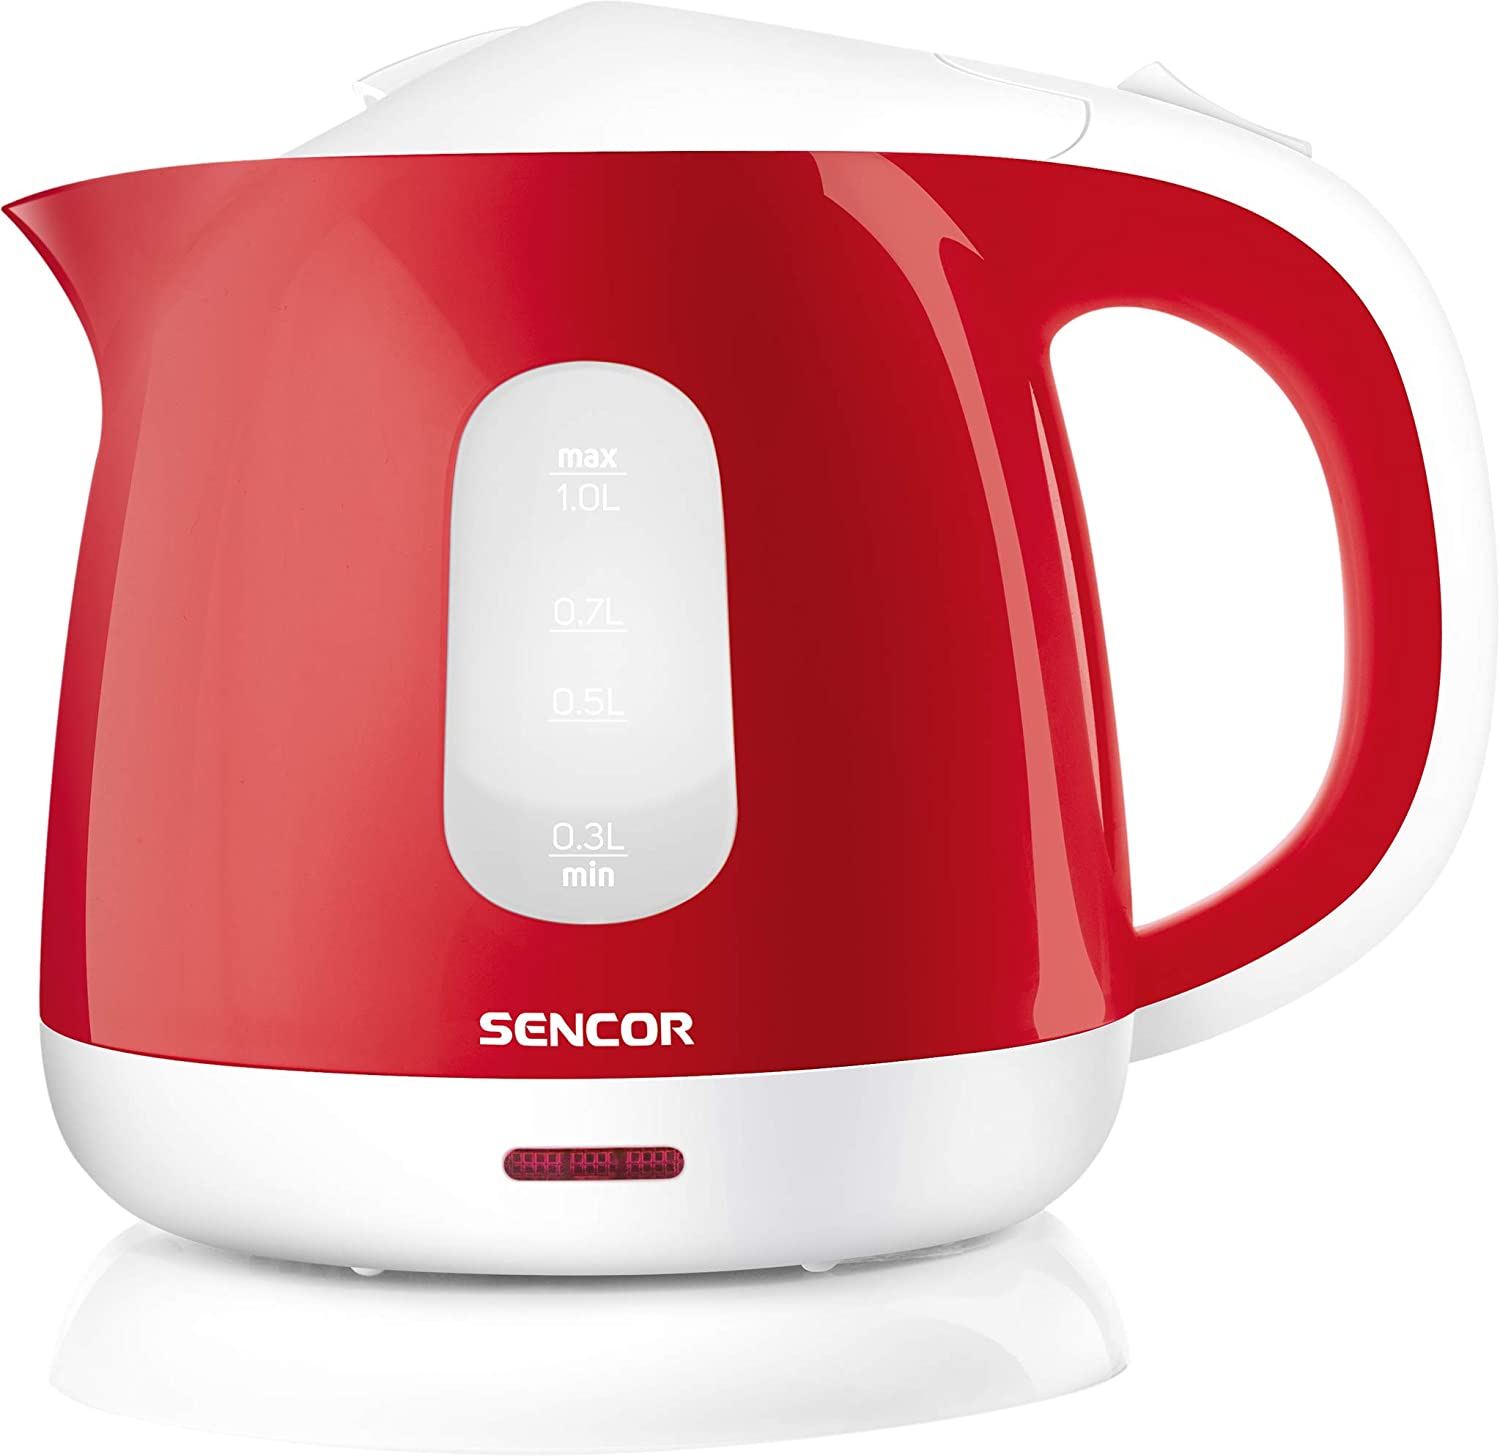 SENCOR SWK 1014RD Kettle with Removable Filter, 1 Litre, Red, 1 Litre